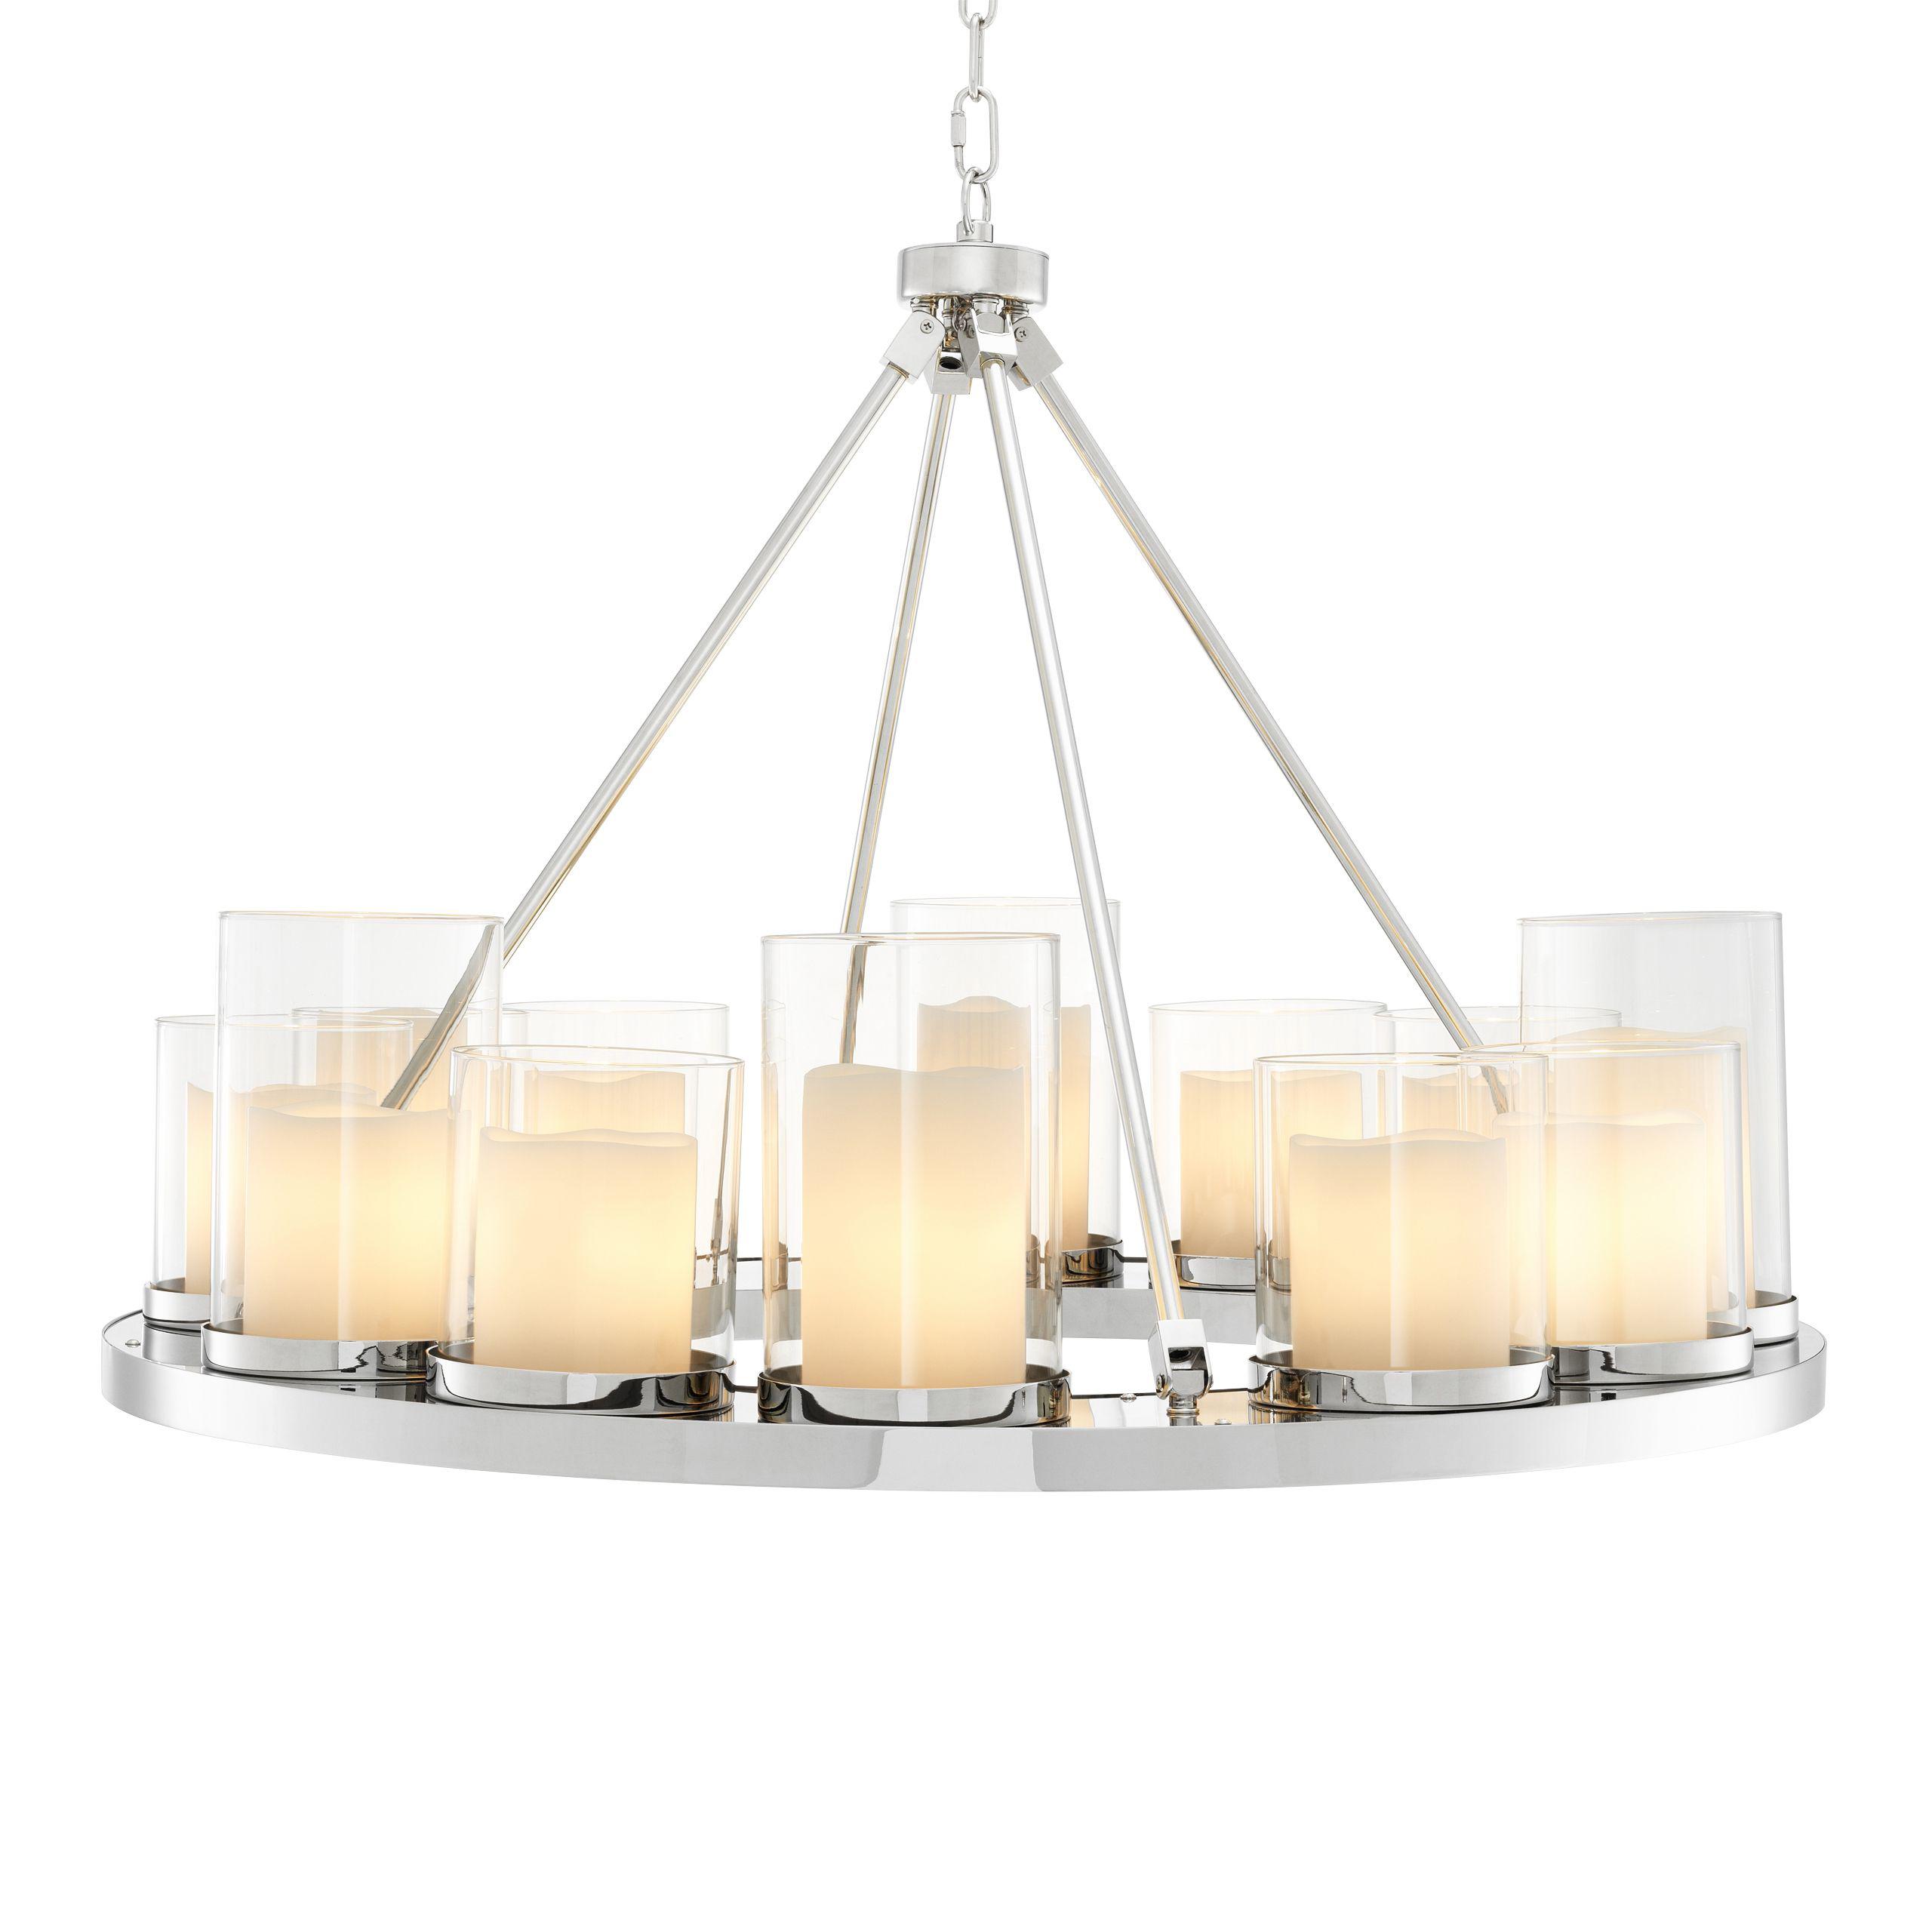 polished stainless steel | clear glass | including faux candle shades round